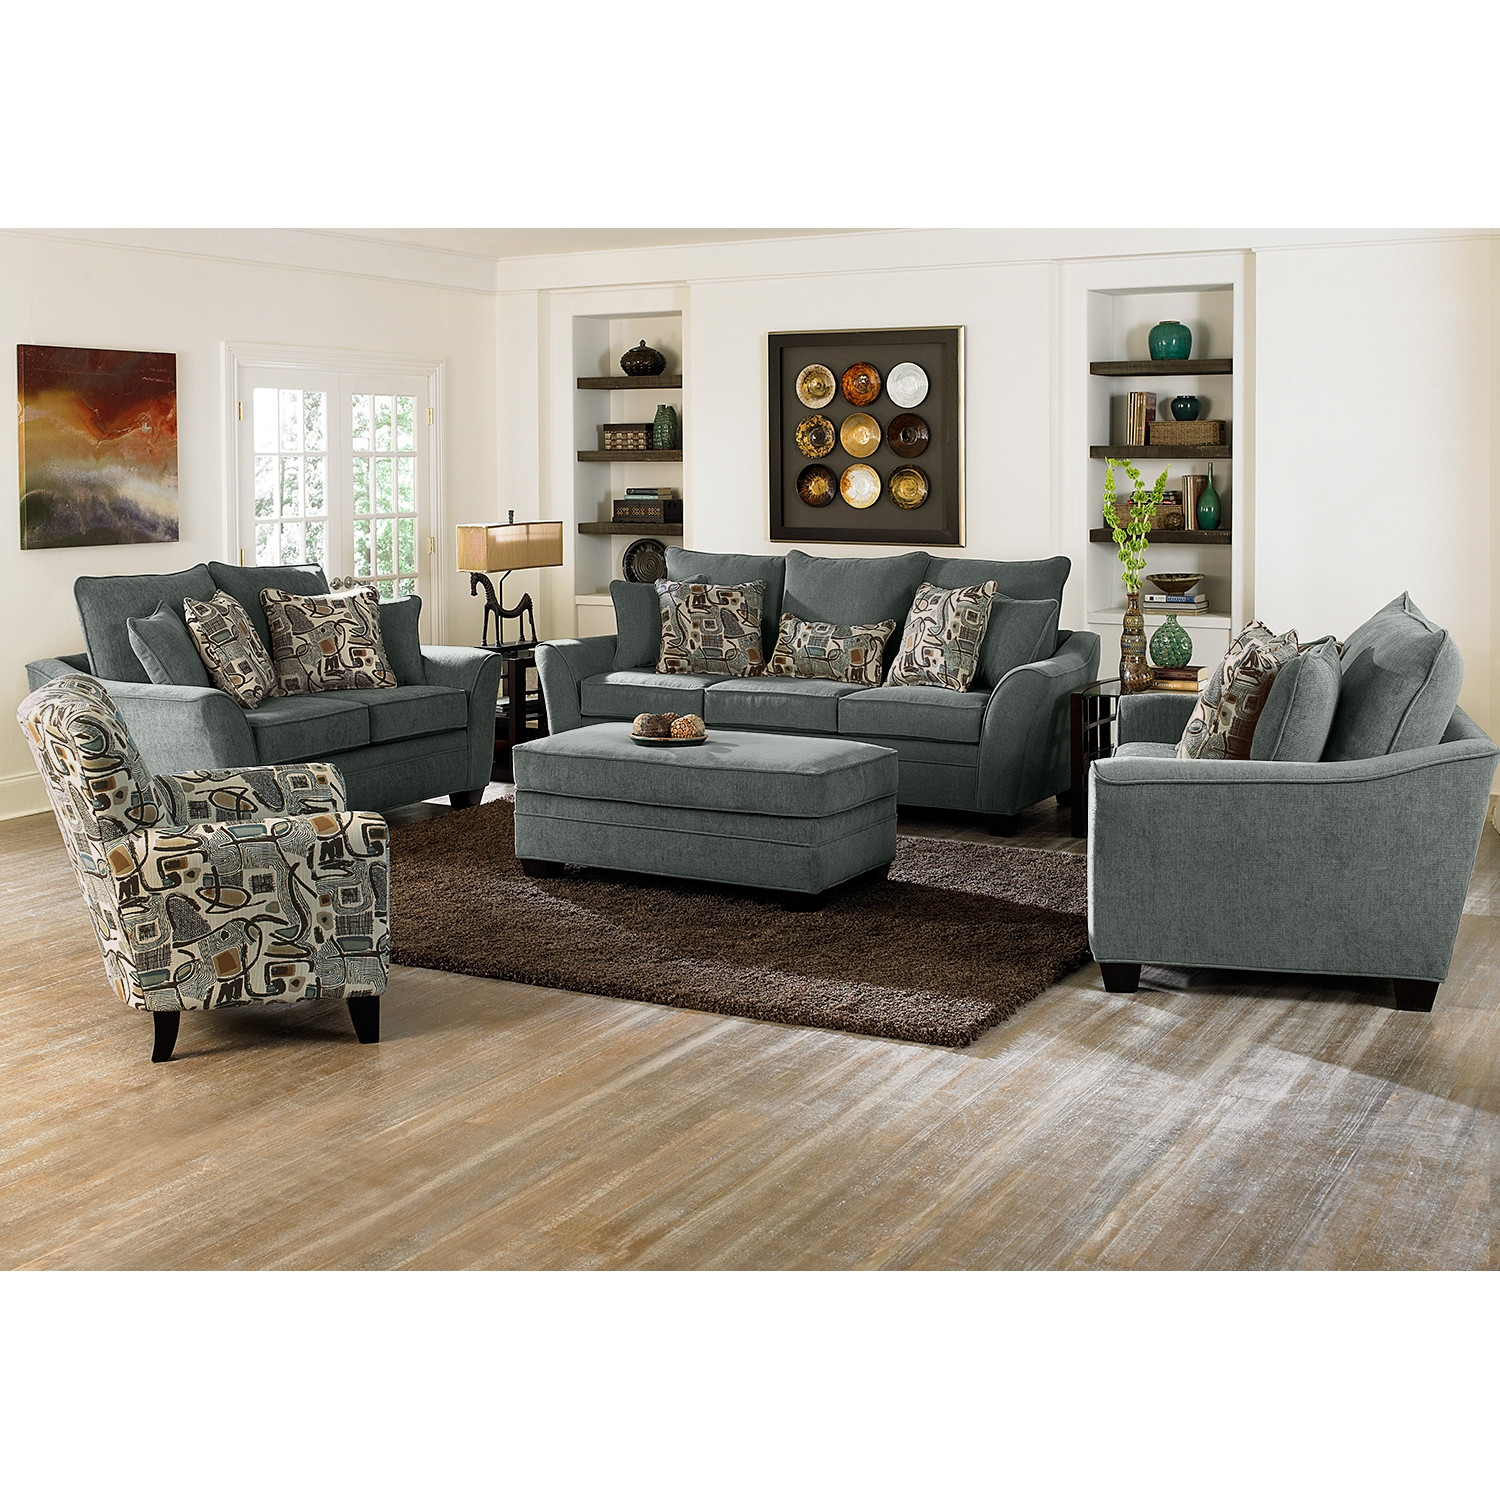 Living Room Furniture Chairs
 Perfect Chairs With Ottomans For Living Room – HomesFeed